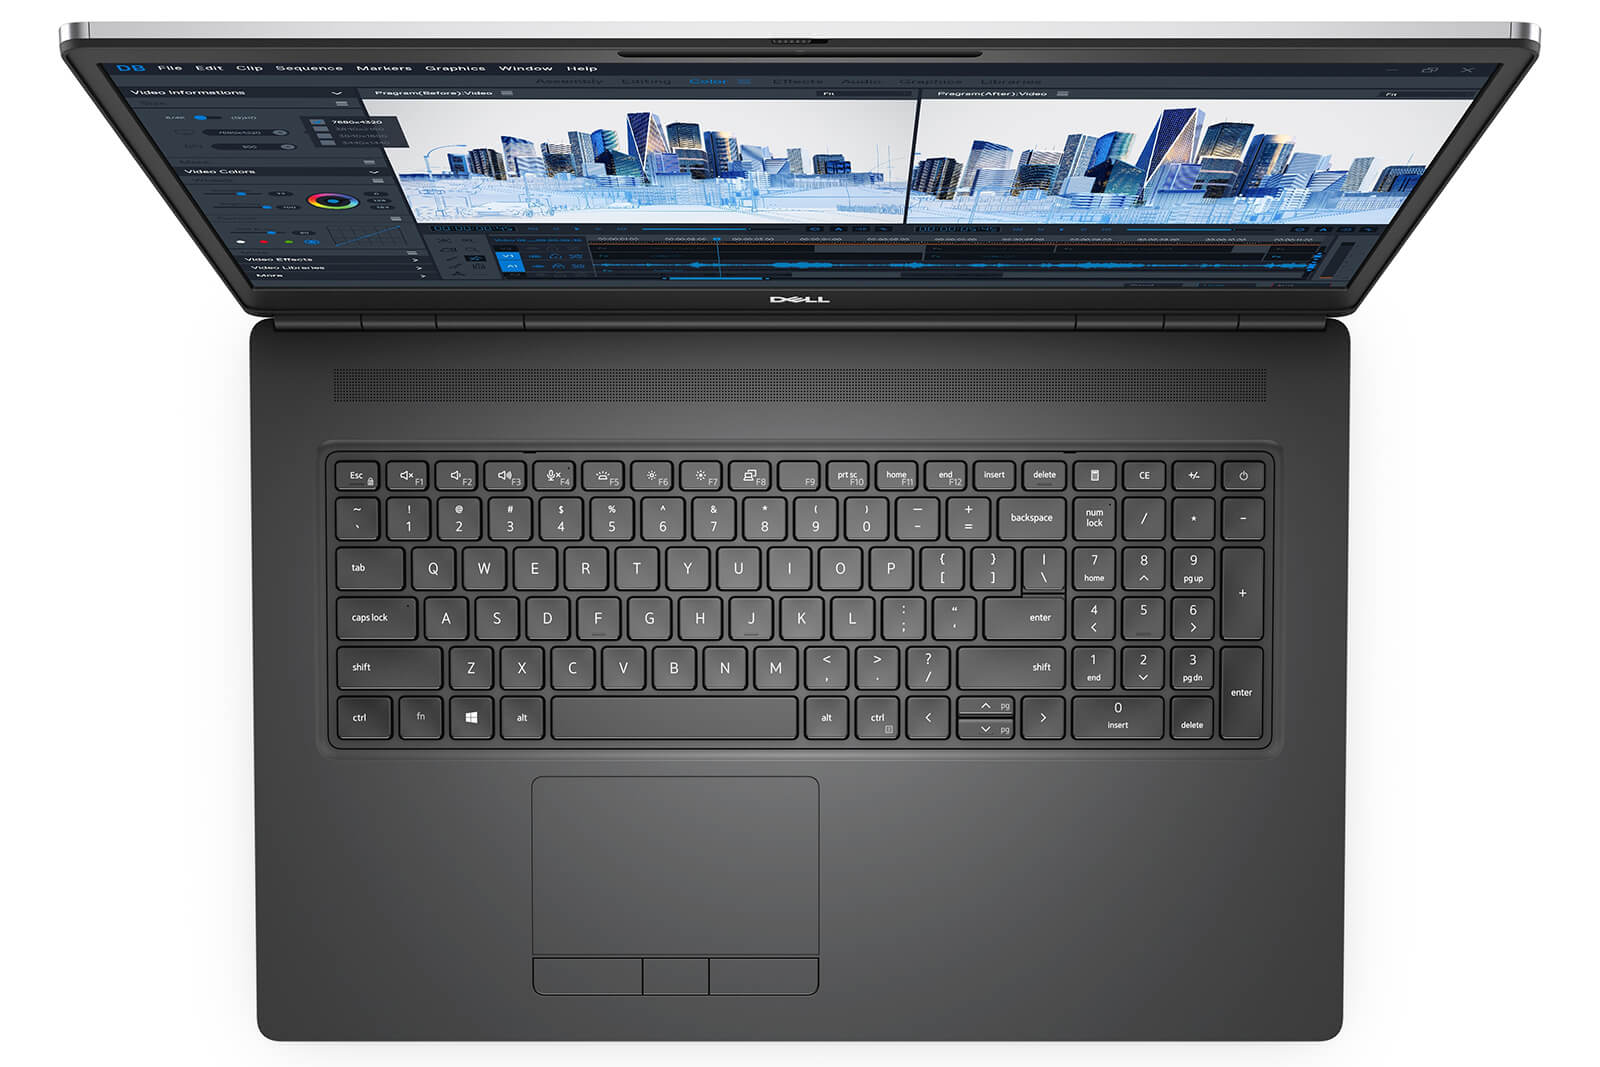 Dell Precision 7760 Mobile Workstation Features 04